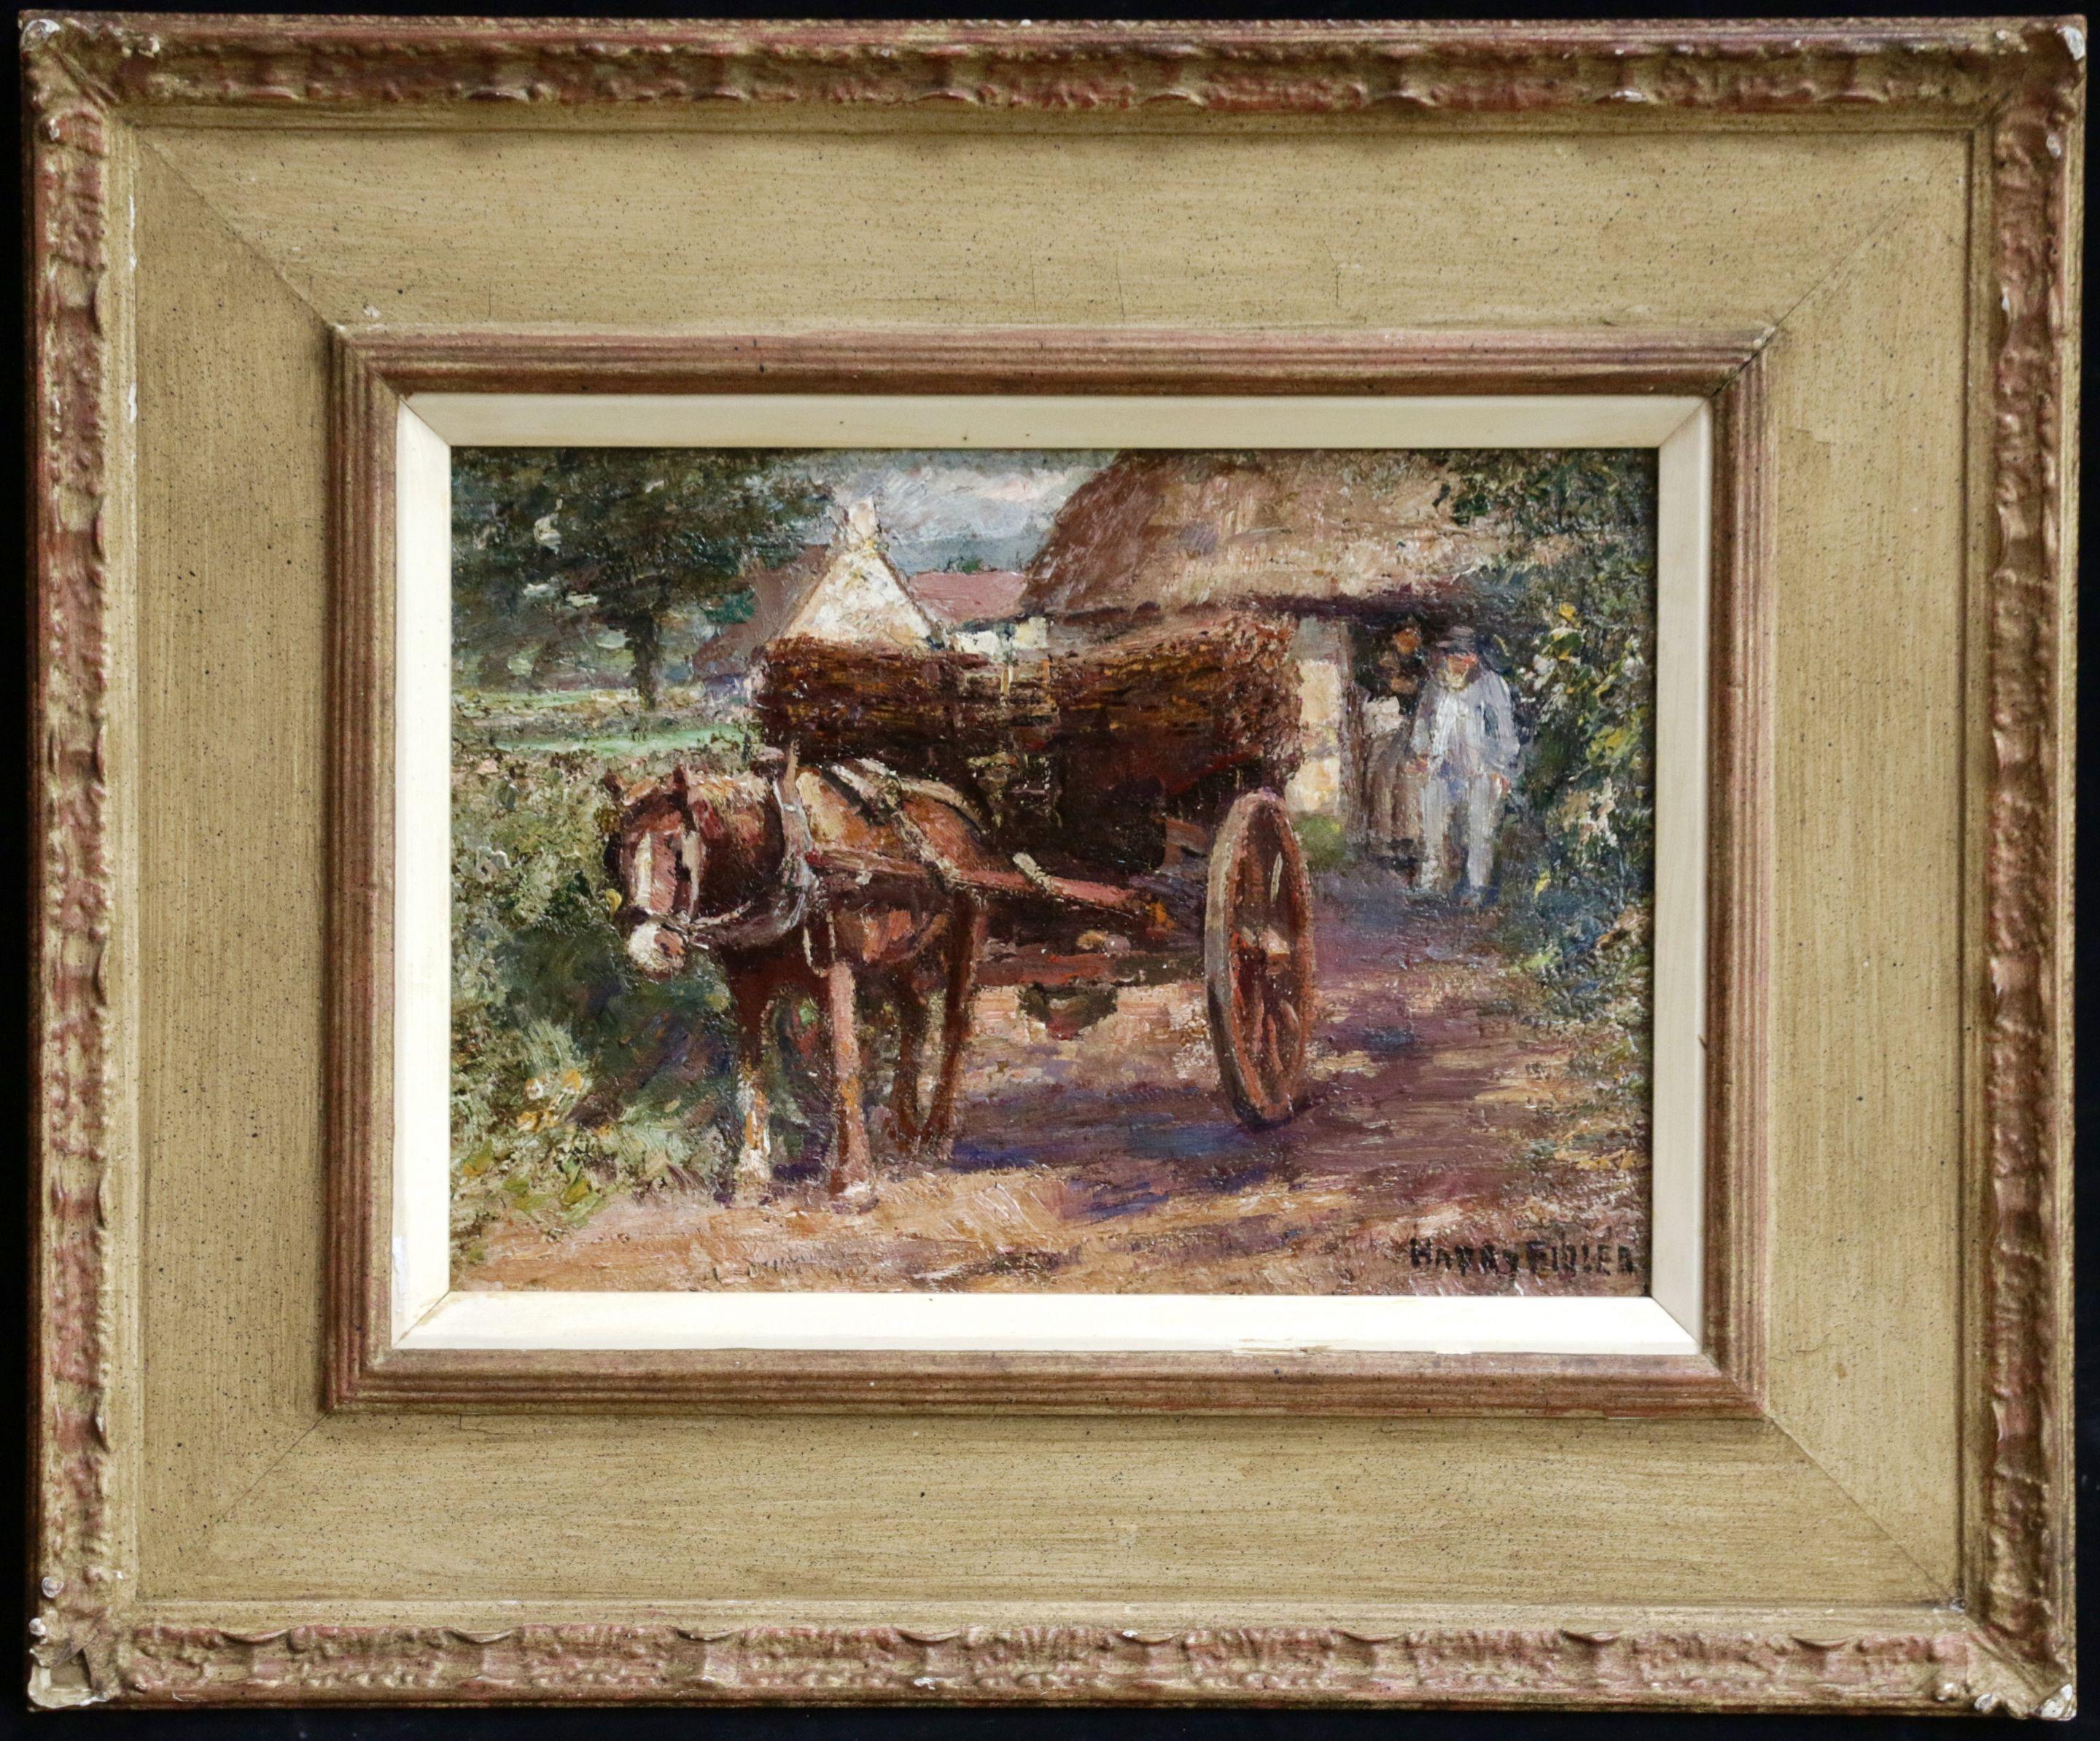 Carrying Hurdles - 19th Century Oil, Horse & Cart by Cottages by Harry Fidler 1